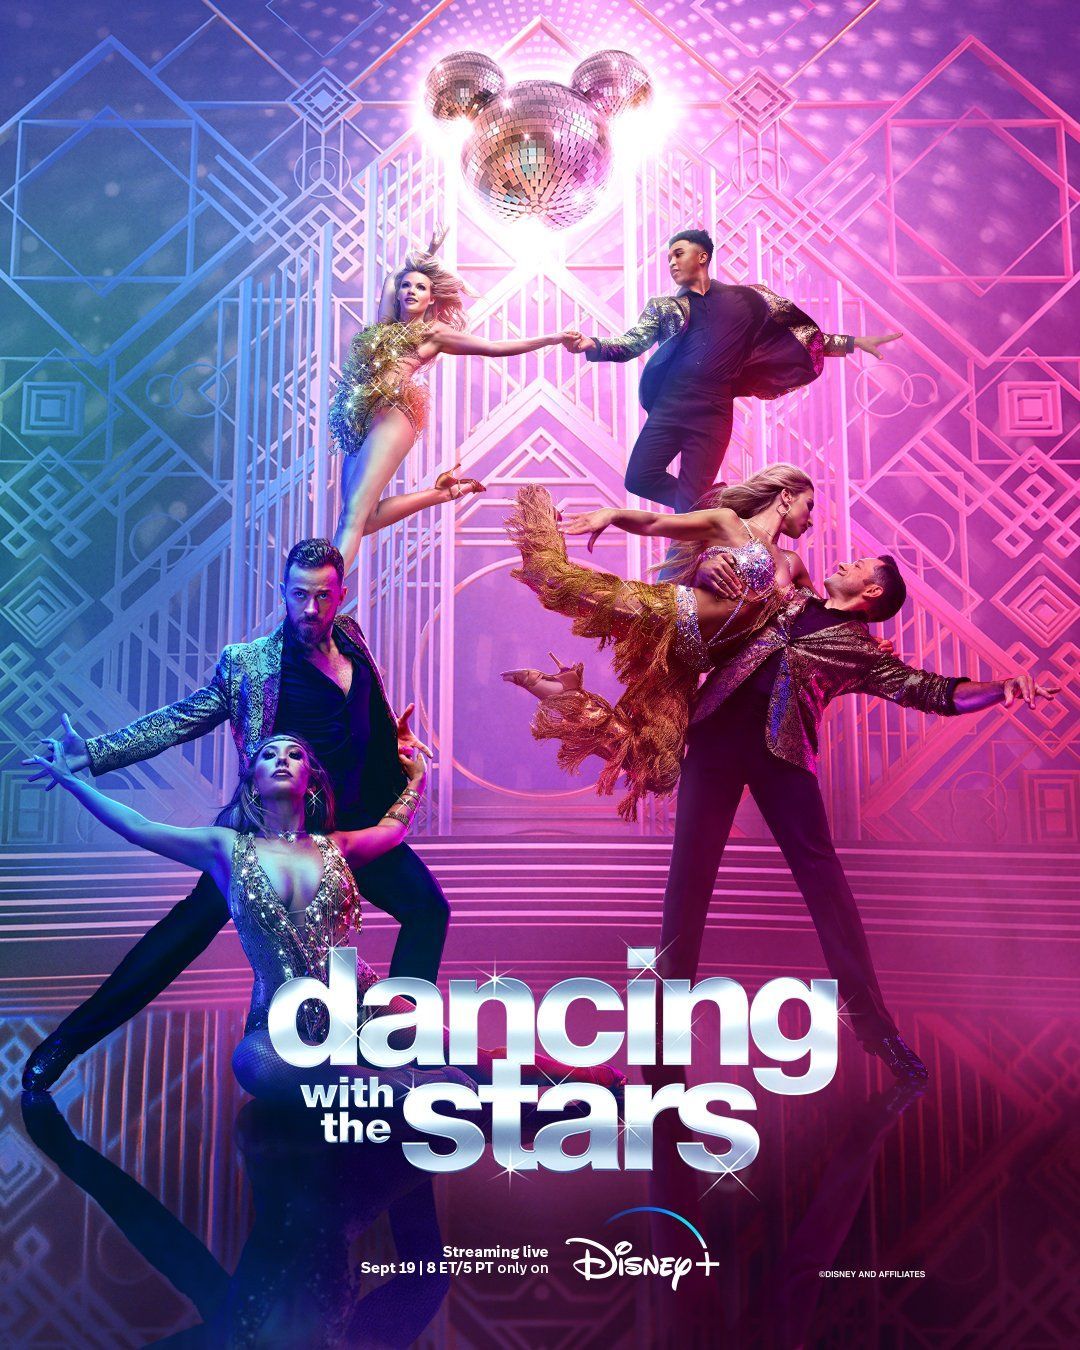 'Dancing With the Stars' on Disney+ 